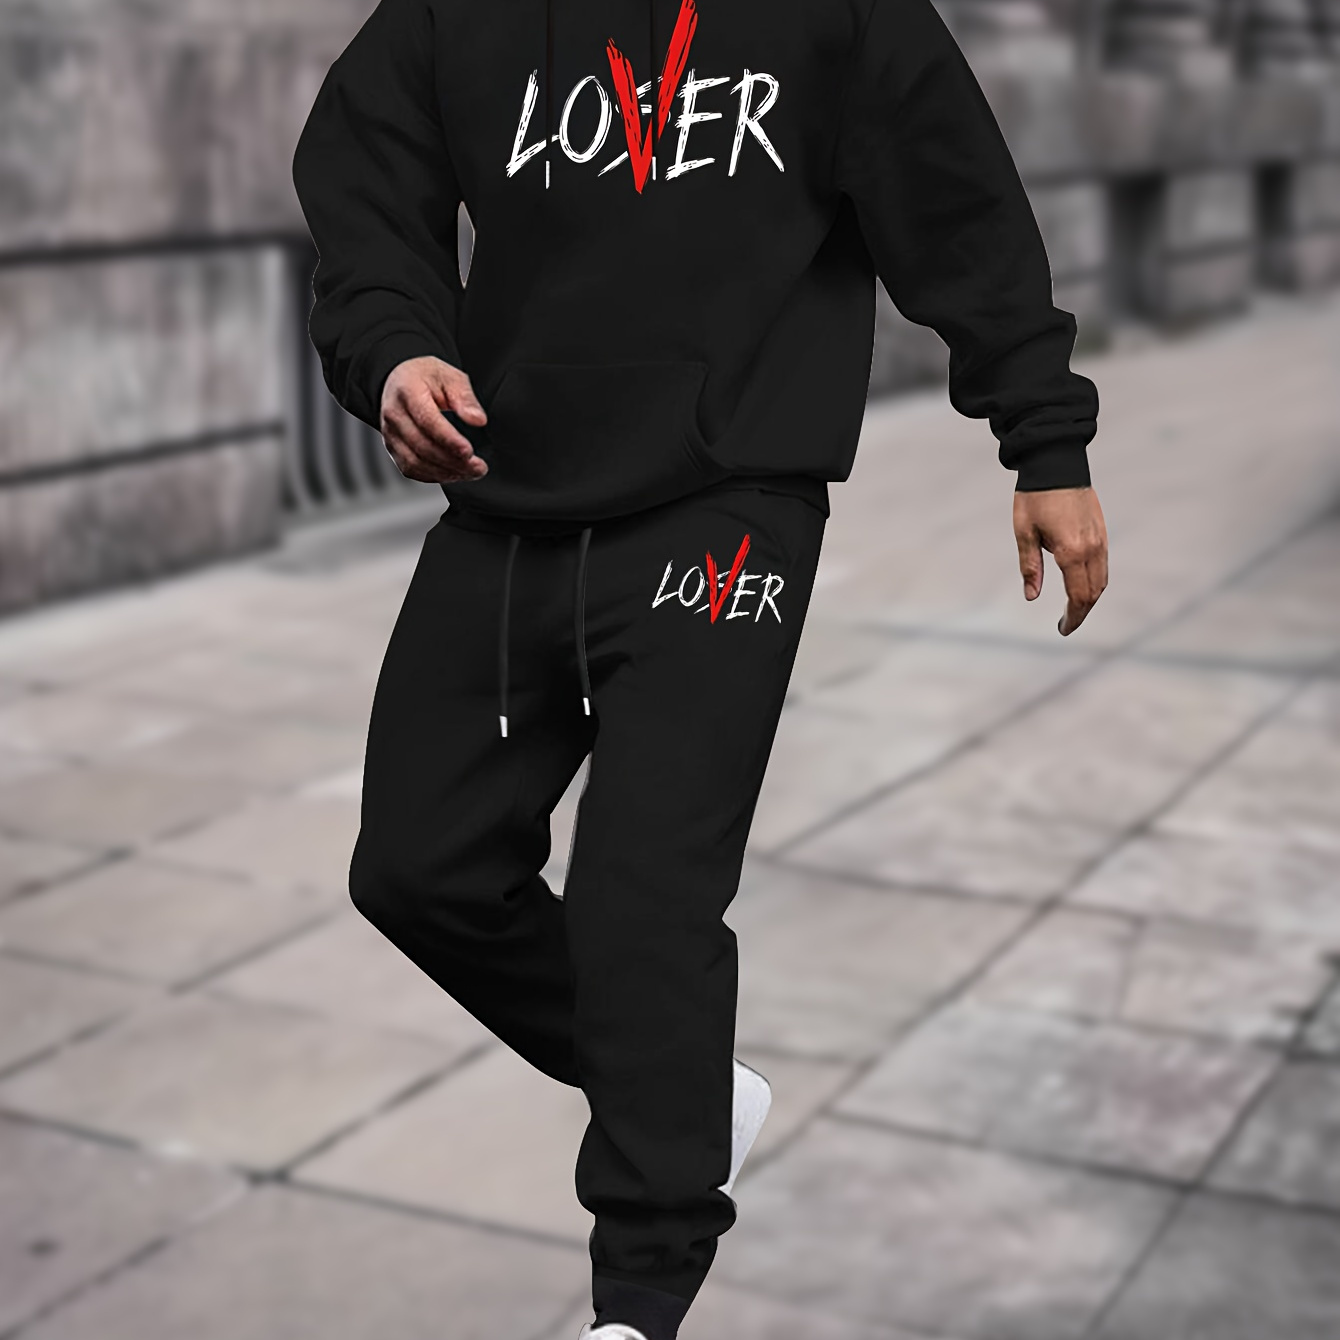 

Lover Loser Print, Men's 2pcs Outfits, Casual Long Sleeve Hooded Pullover Sweatshirt And Sweatpants Set For Spring Fall, Men's Clothing